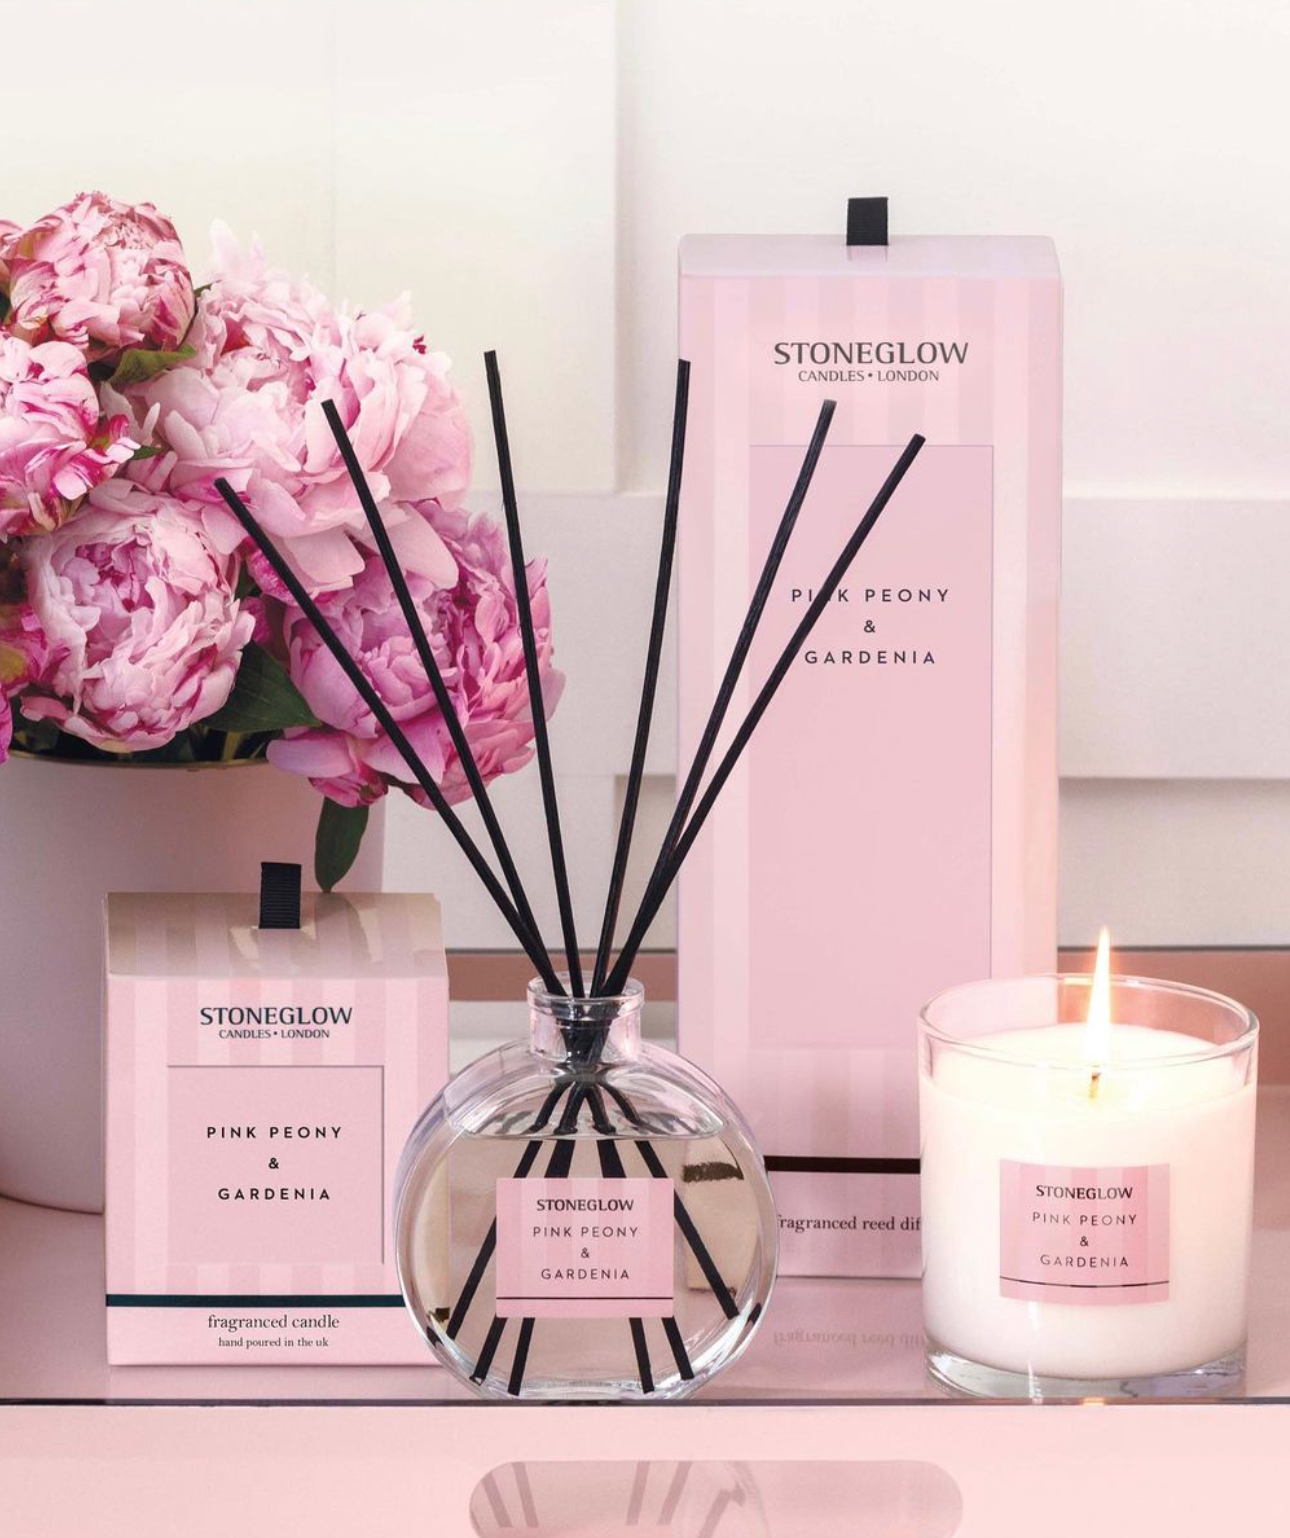 Stoneglow Modern Classics Collection Scented Candle, Pink Peony & Gardenia